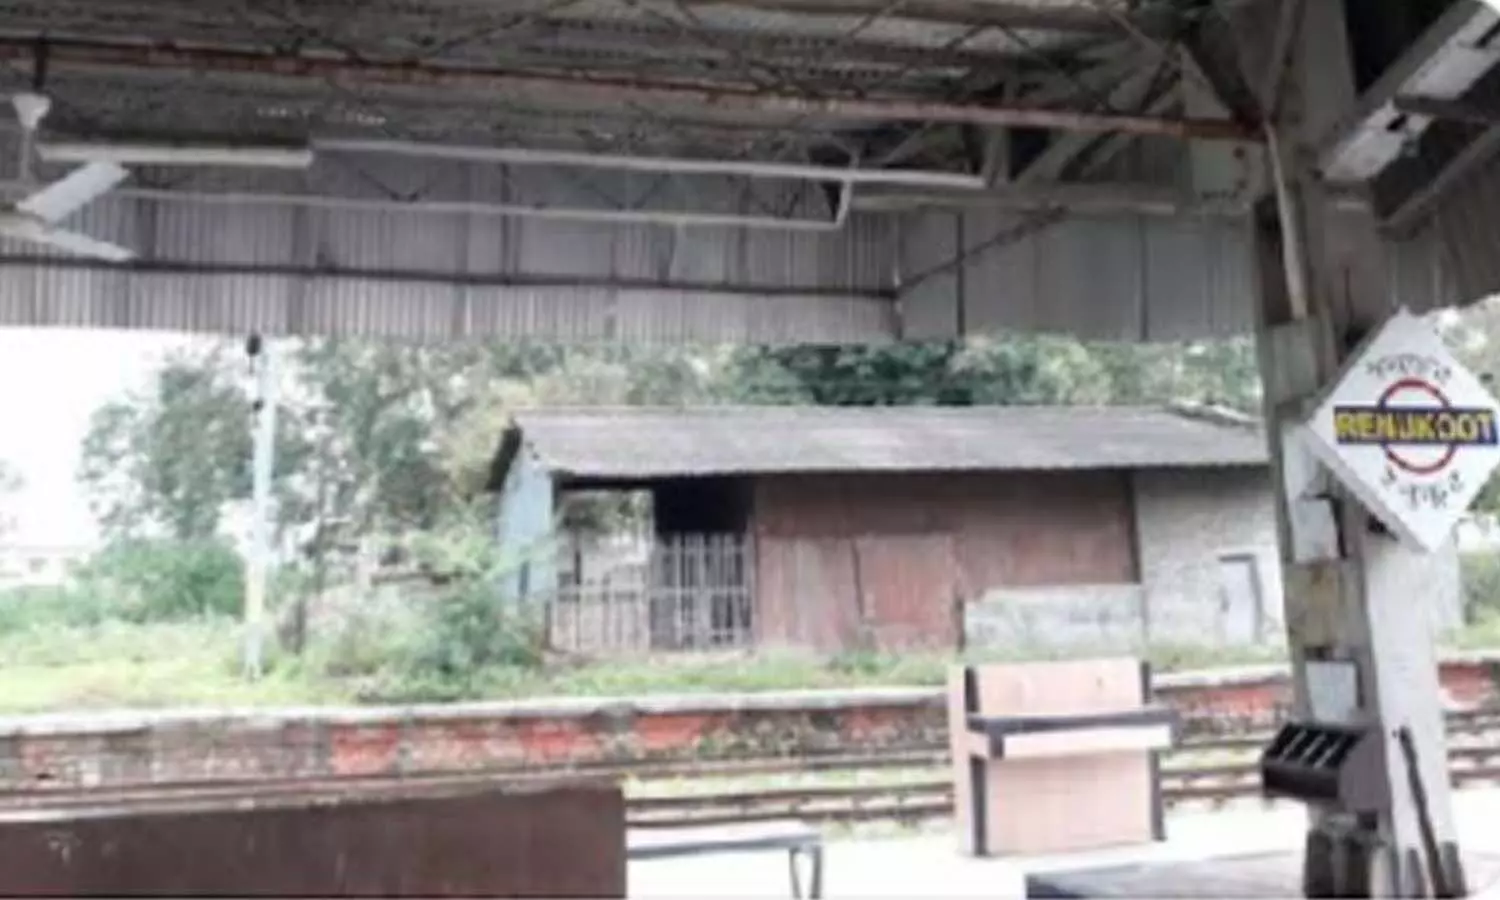 The picture of Renukoot railway station in which the fans were told closed